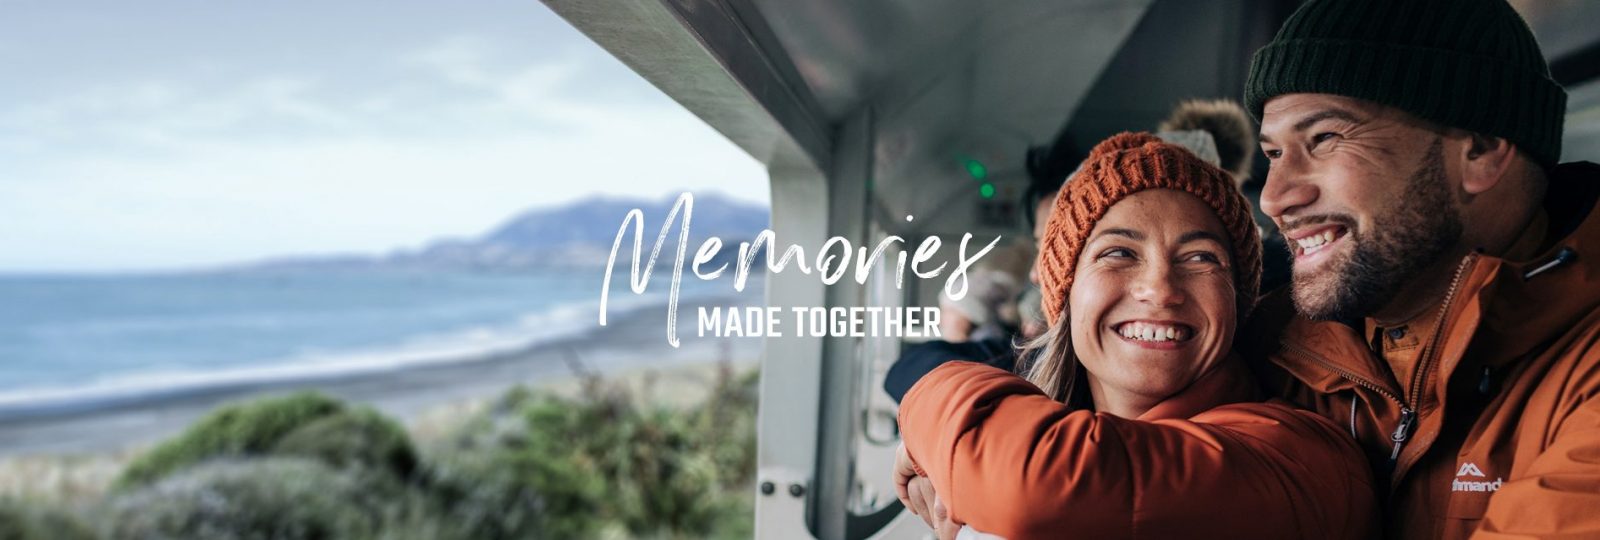 KiwiRail – Memories Made Together Campaign - Banner Image